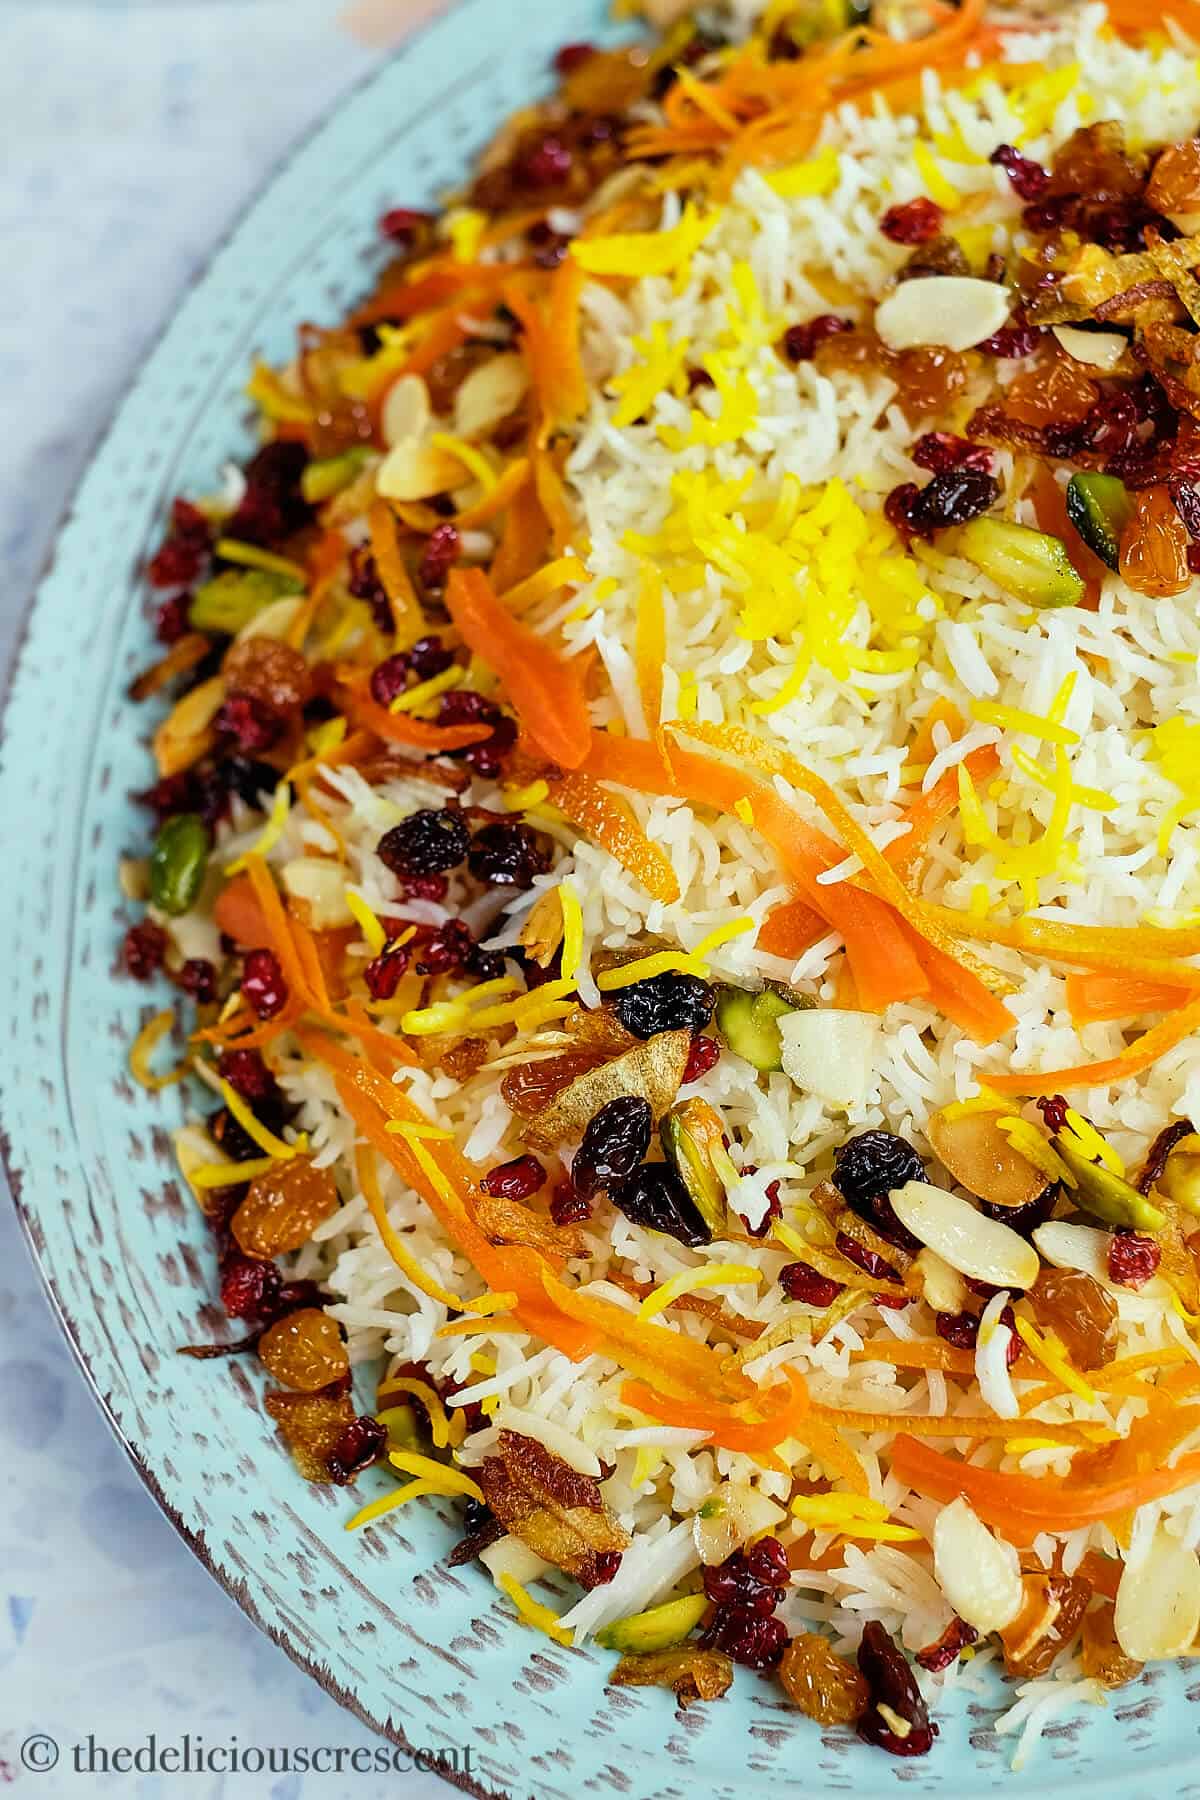 Persian jeweled rice served in a light blue plate.